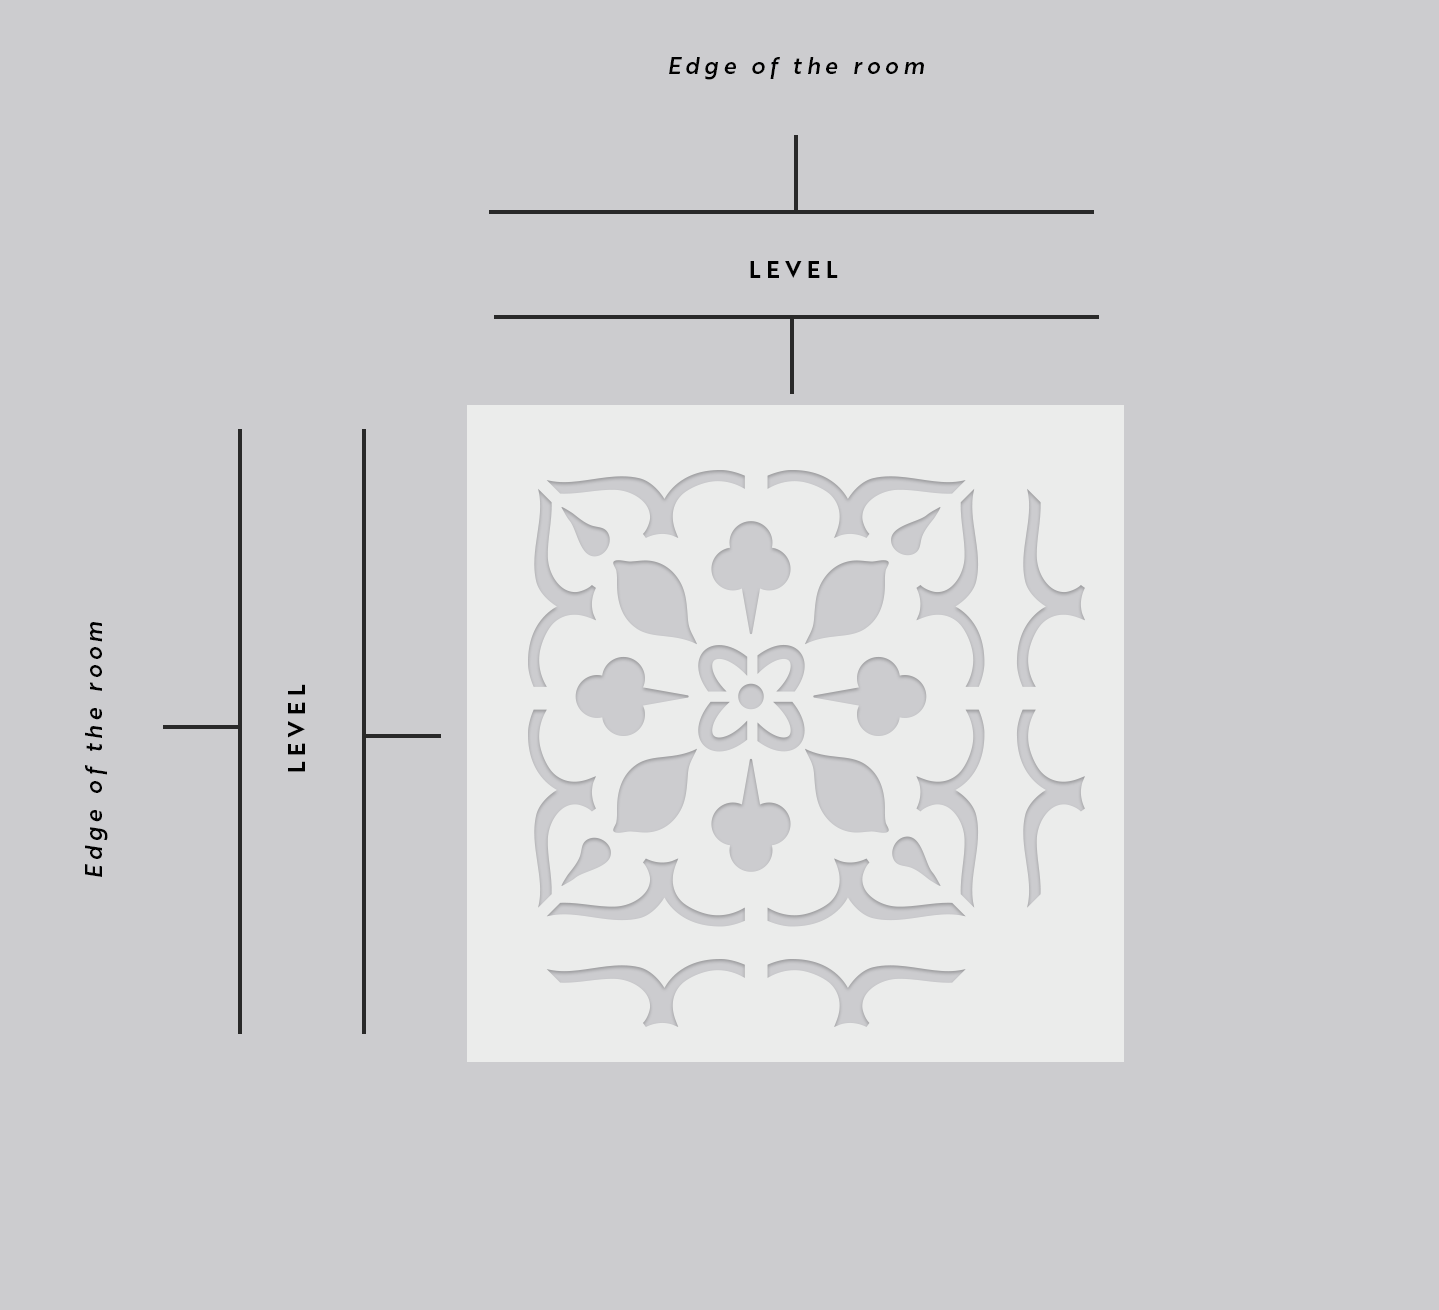 How to stencil a repeat pattern